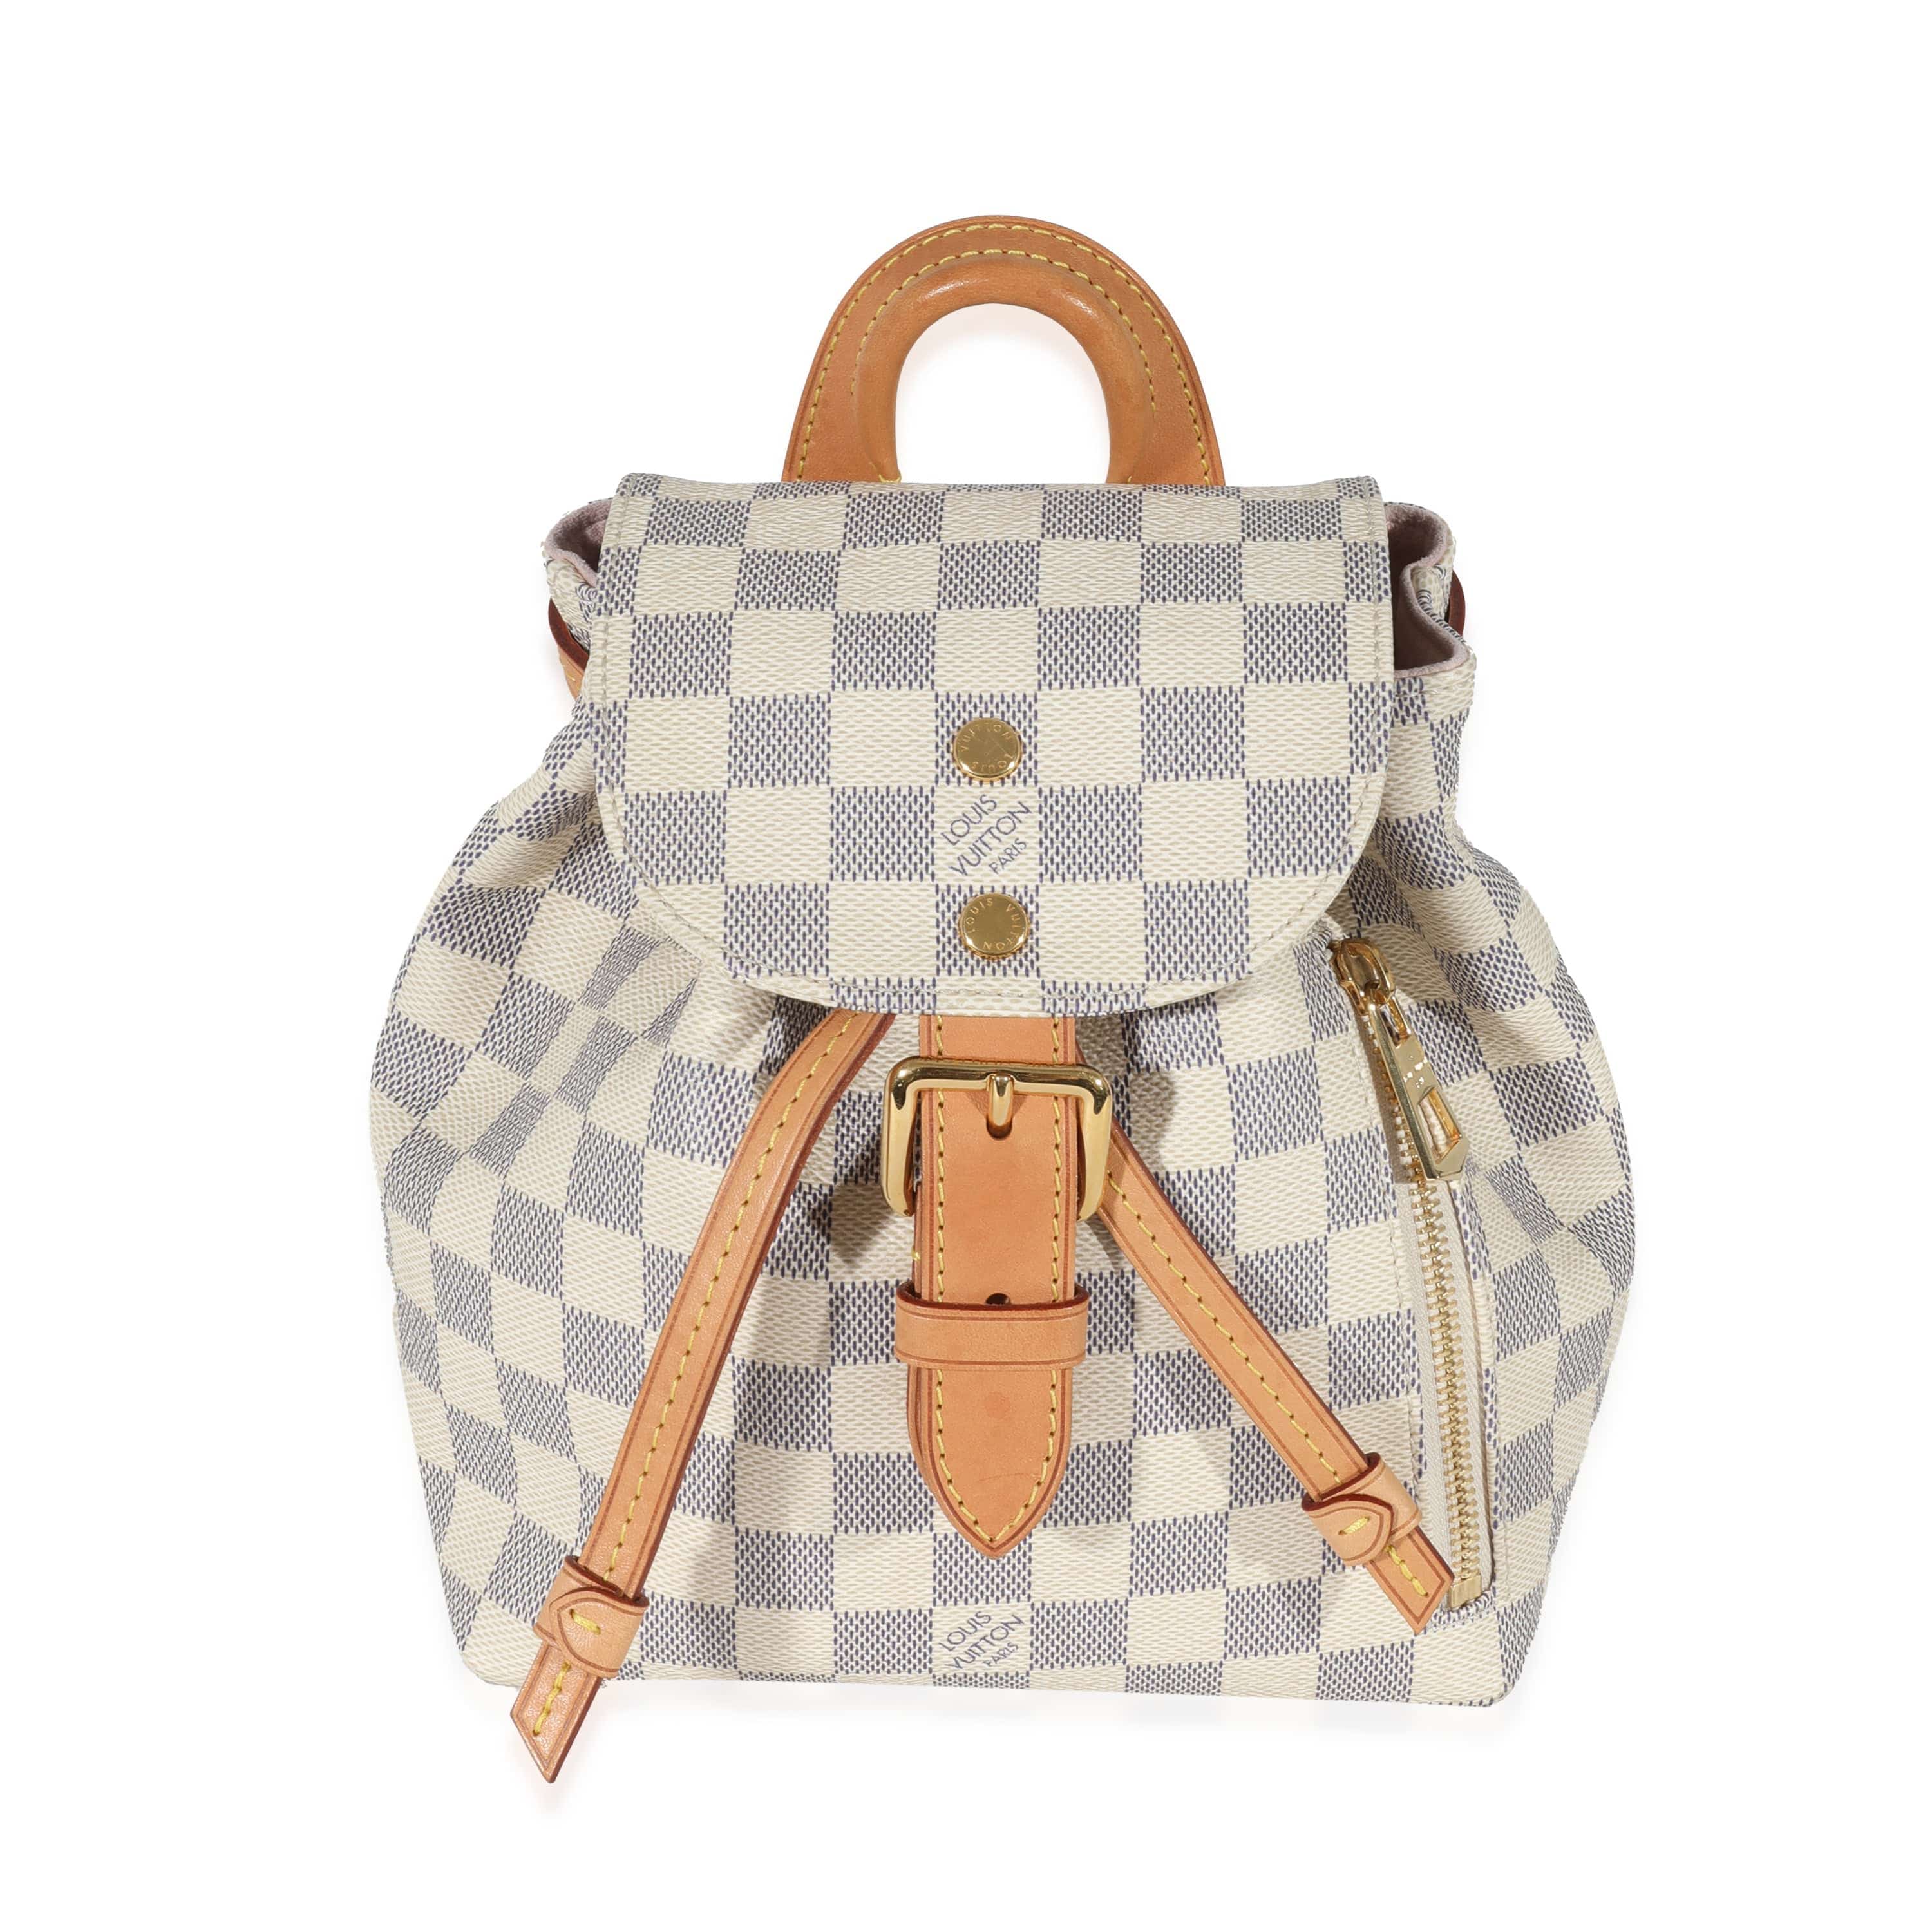 Louis Vuitton Sperone B.B. backpack for Sale in Stockton, CA